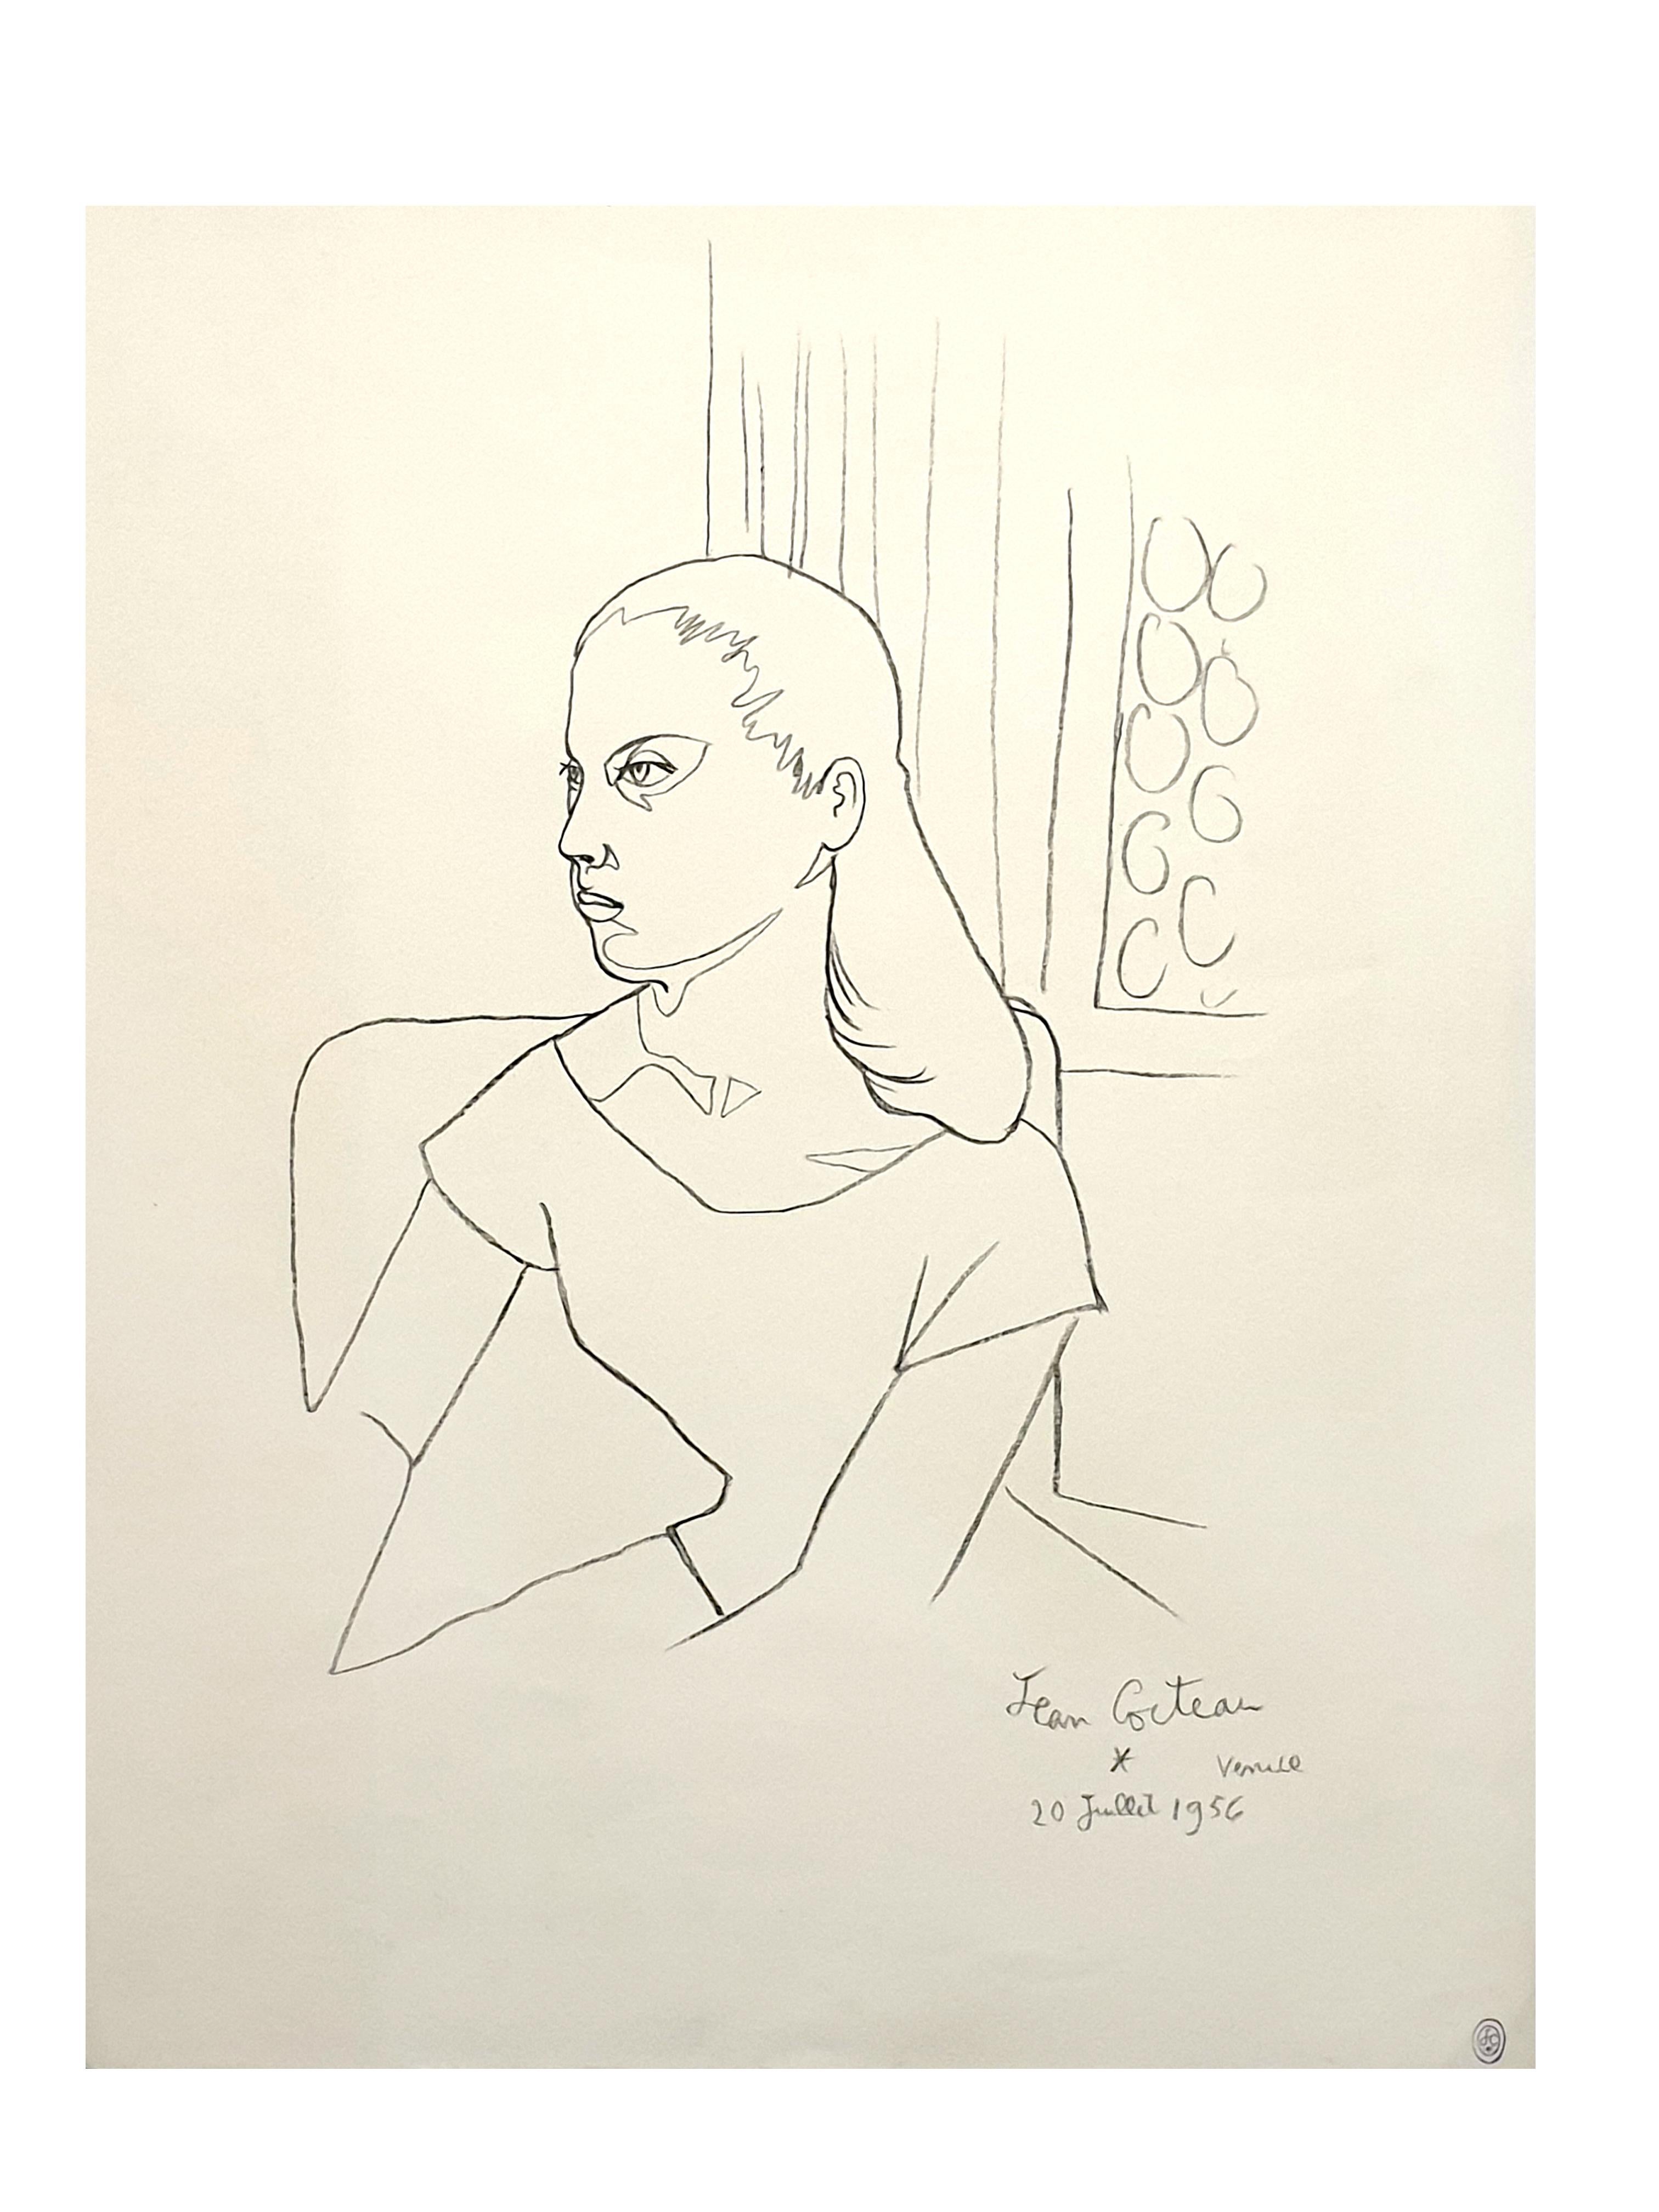 Jean Cocteau - Young Girl - Original Lithograph
Signed and dated in the plate
Stampsigned
Dimensions: 53 x 42 cm
1956
Provenance : Succession Dermit, Cocteau's heir